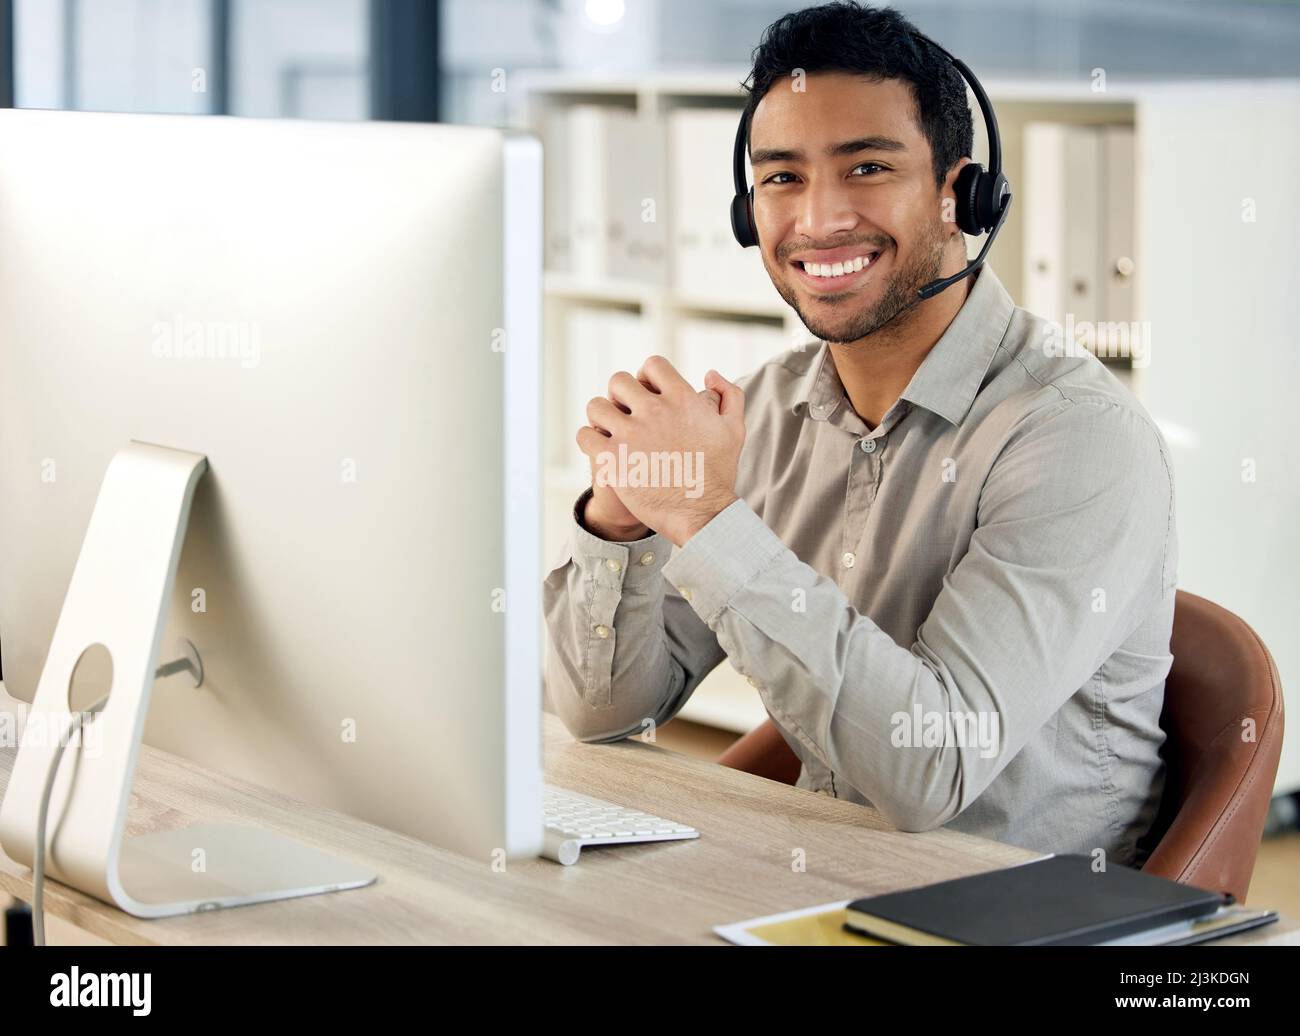 Day and night, we keep our customer service tight. Portrait of a young businessman using a headset and computer in a modern office. Stock Photo